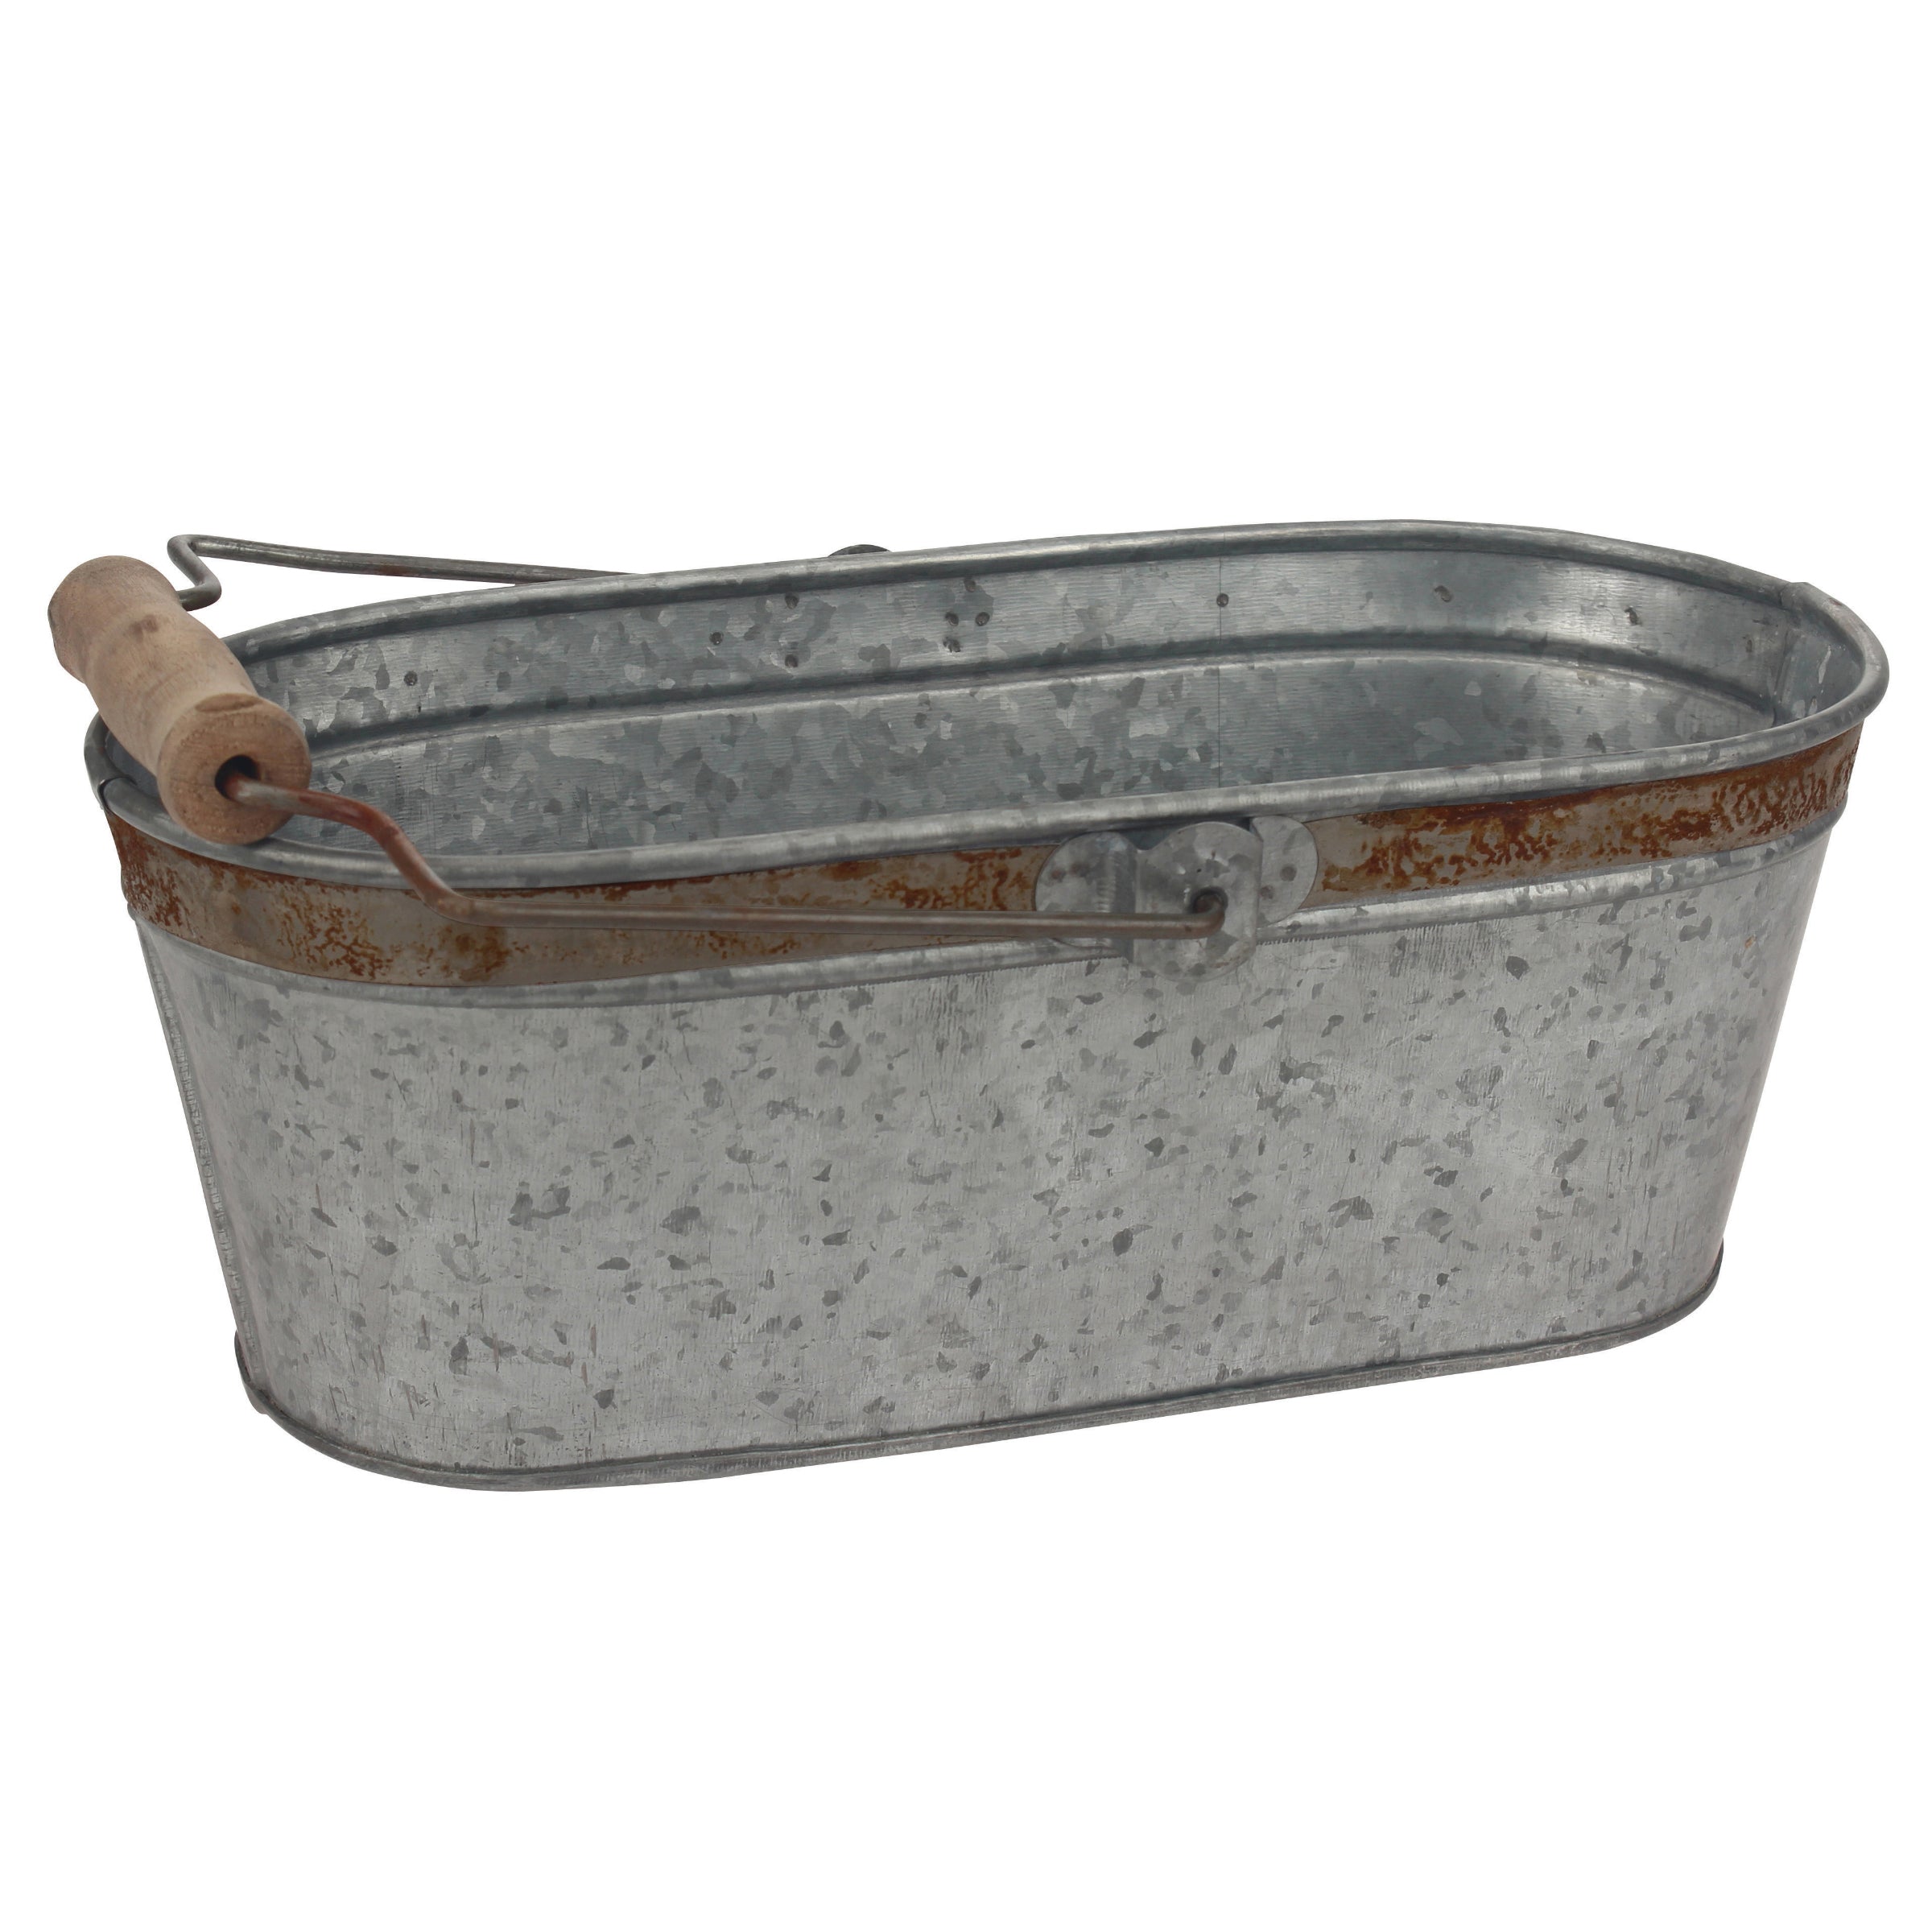 Small 6 Round Metal Bucket With Handle, Vintage Rustic Farmhouse Container  Storage 